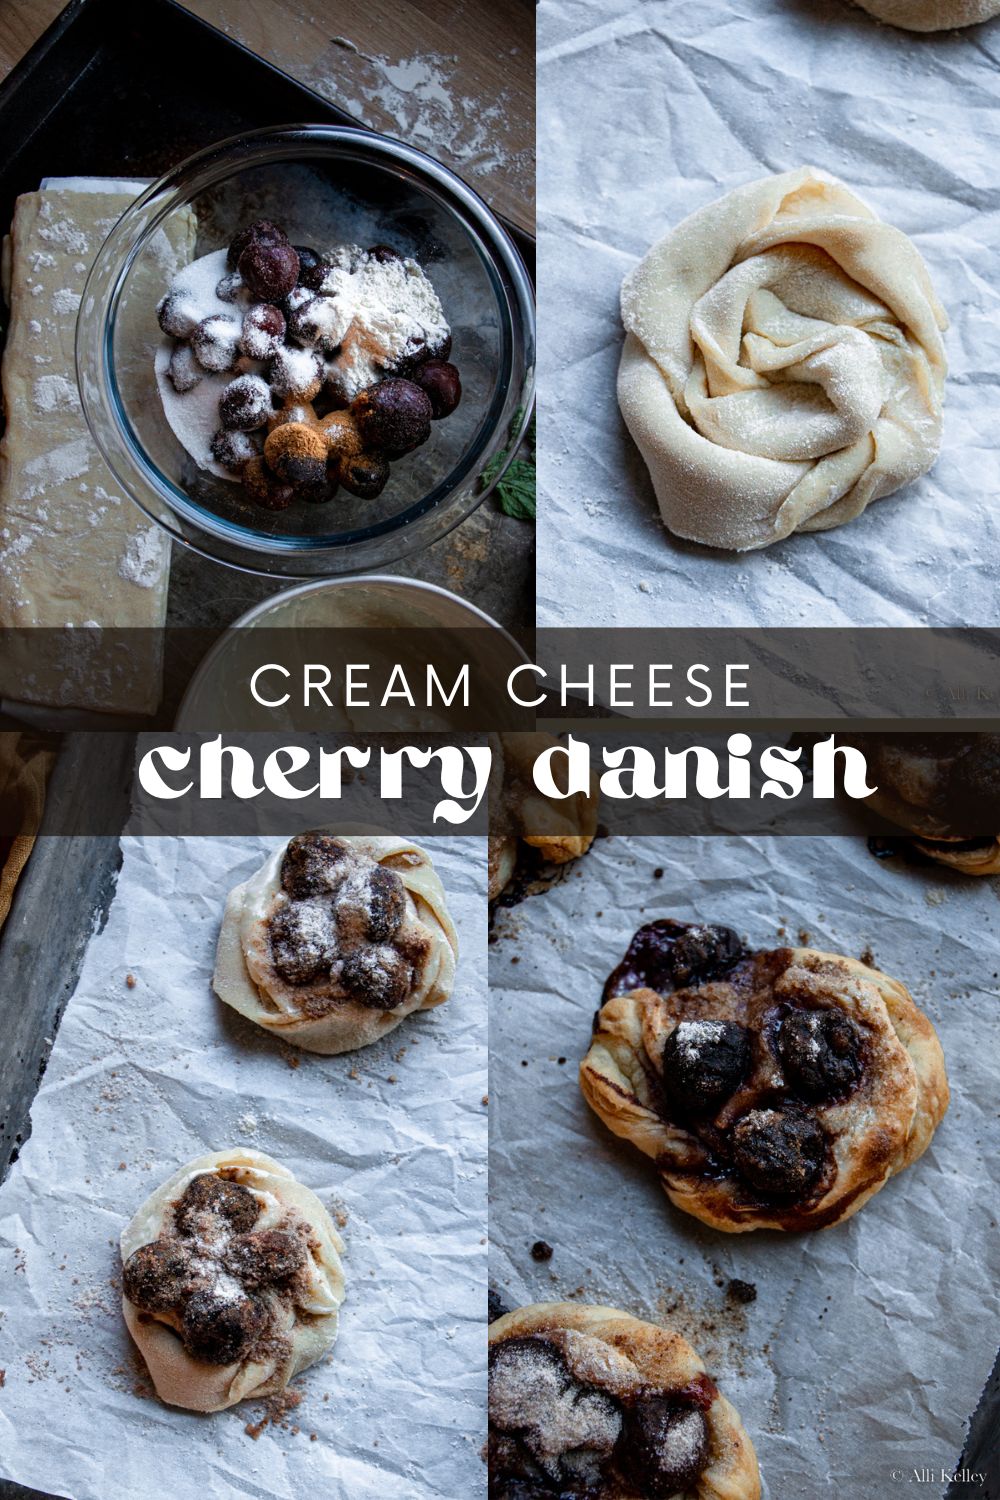 A cherry danish makes the best breakfast or afternoon treat! Combining the sweetness of cherries with the flakiness of puff pastry - all you need is one bite of this delicious cherry cream cheese danish, and your taste buds will be singing! Not to mention this recipe is also super quick and easy to make - win-win!